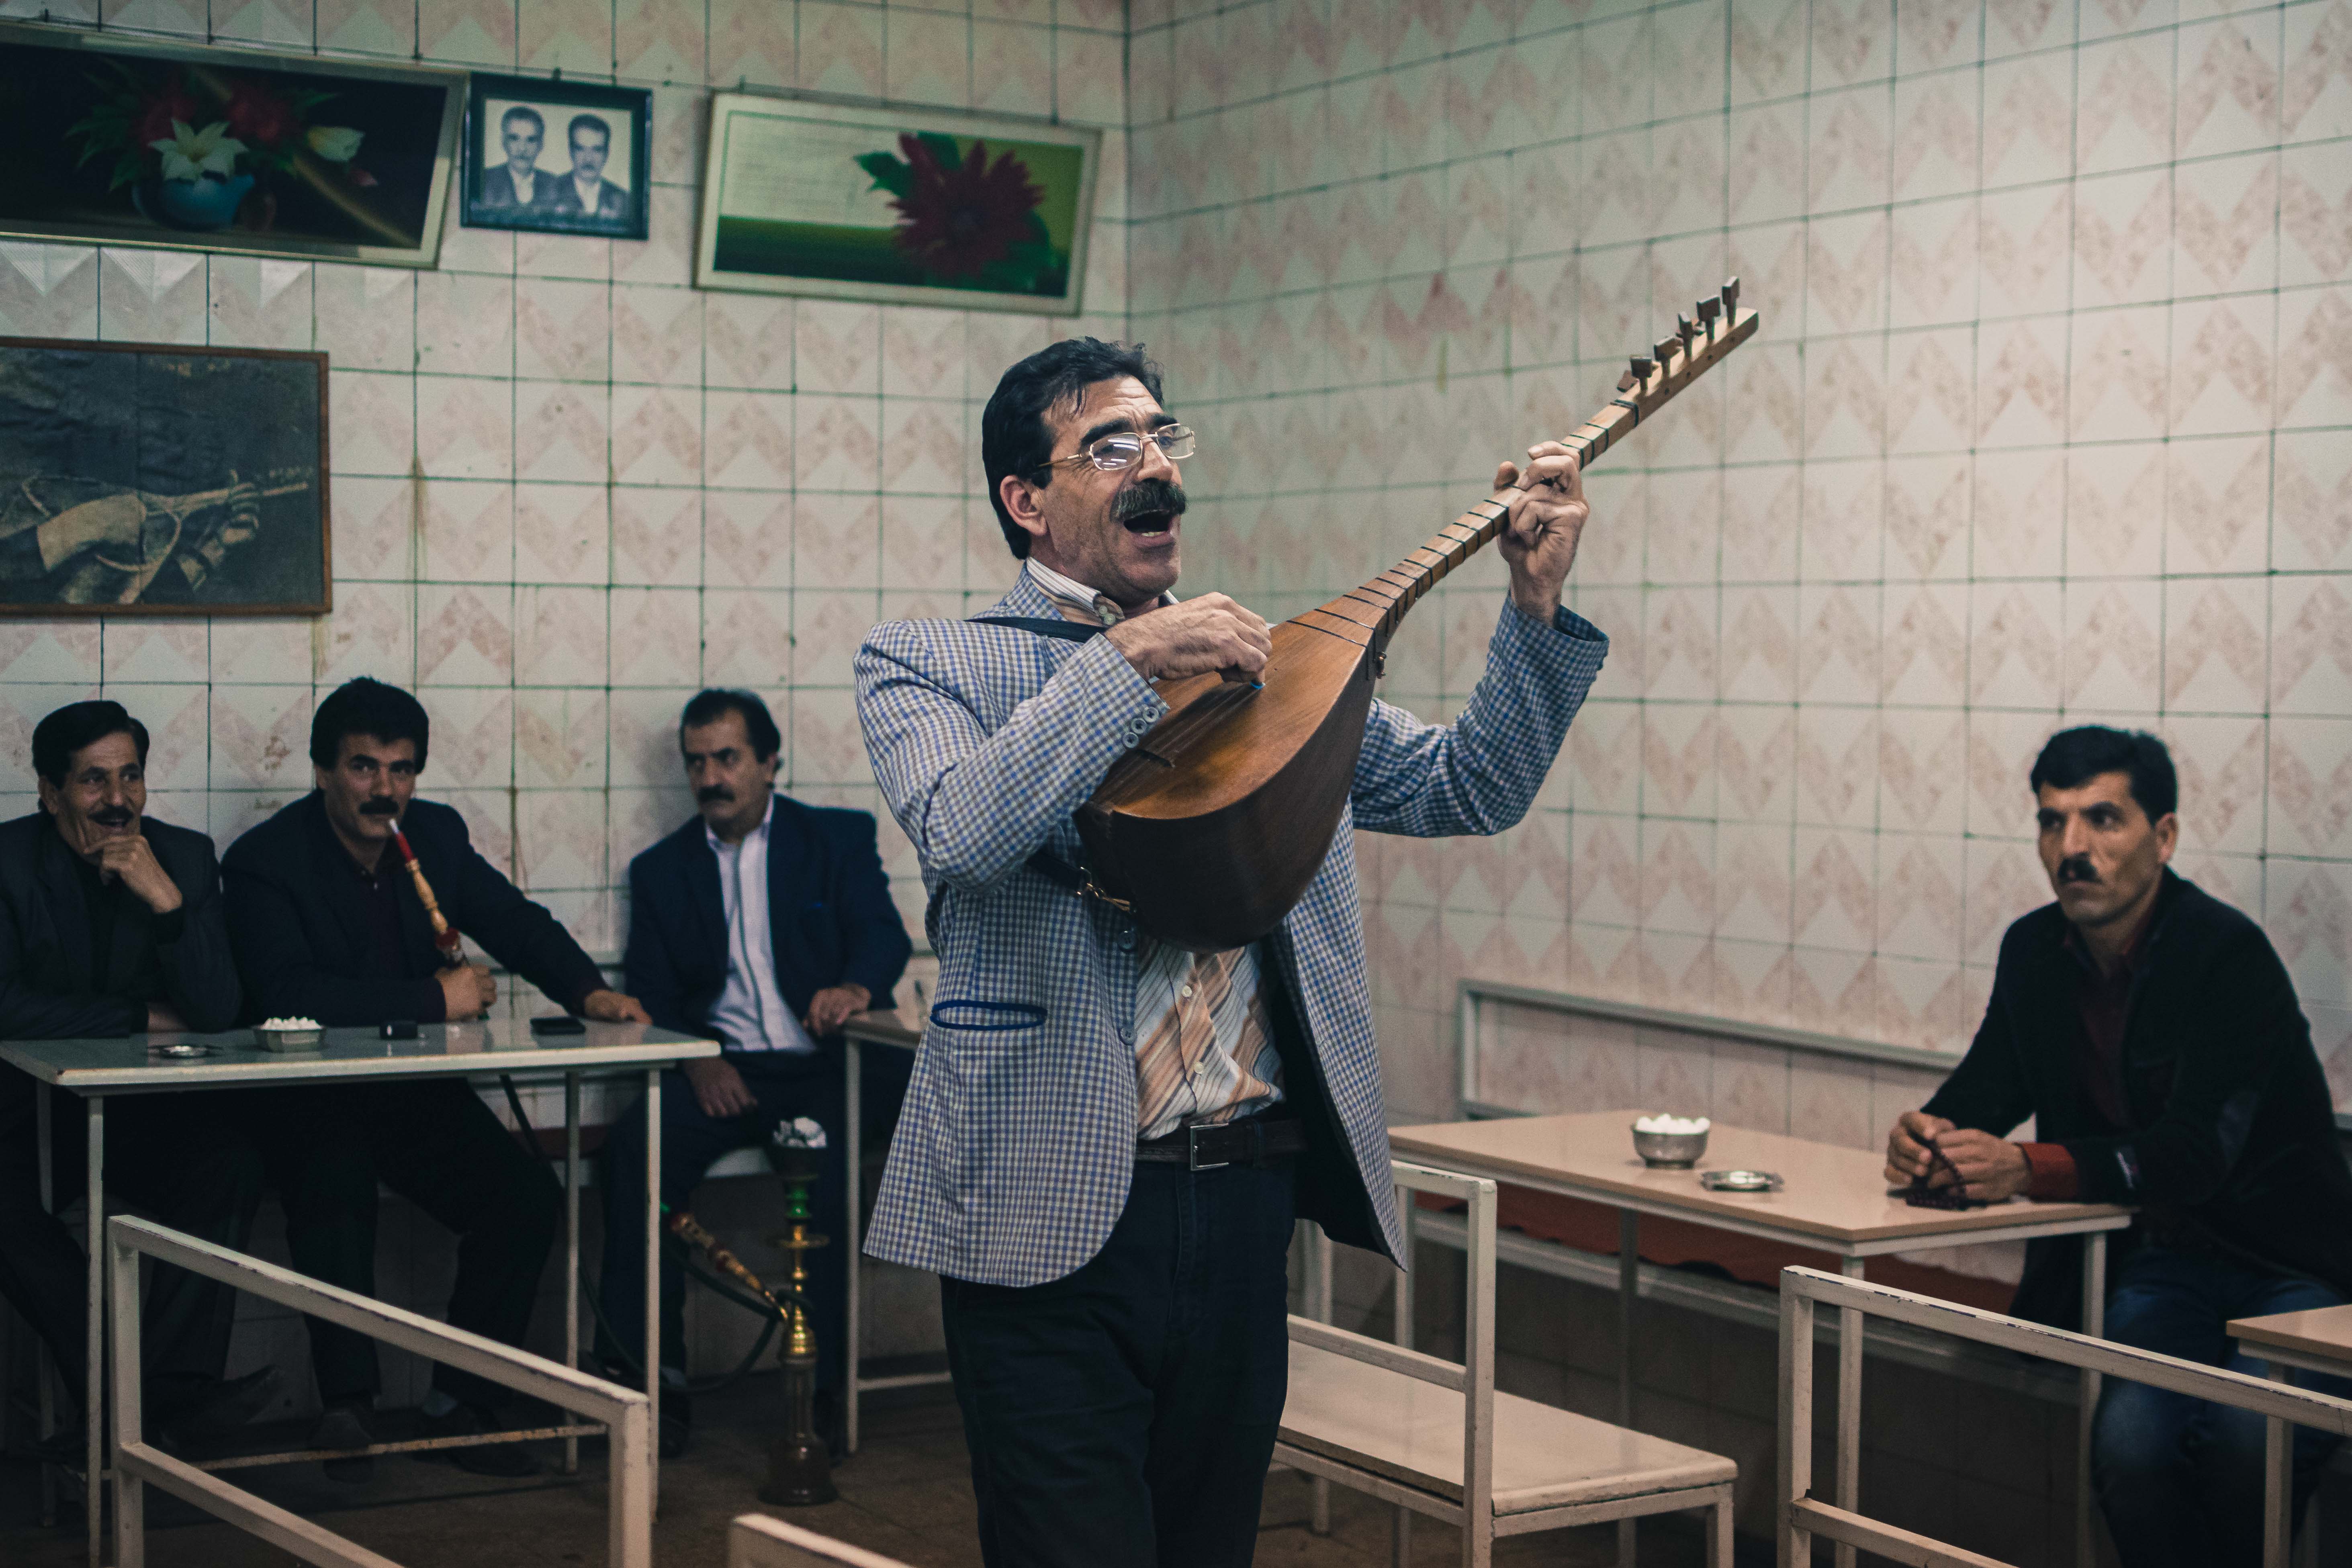 The Arts are the lifeblood of Persian culture, from the 14th Century poet Hafez of Shiraz to present-day tea houses playing traditional Azeri music in Tabriz. Welcomed with a shisha and sweetened tea, I had the honour of listening to an Azerbaijani ashug playing the saz and telling stories of old.